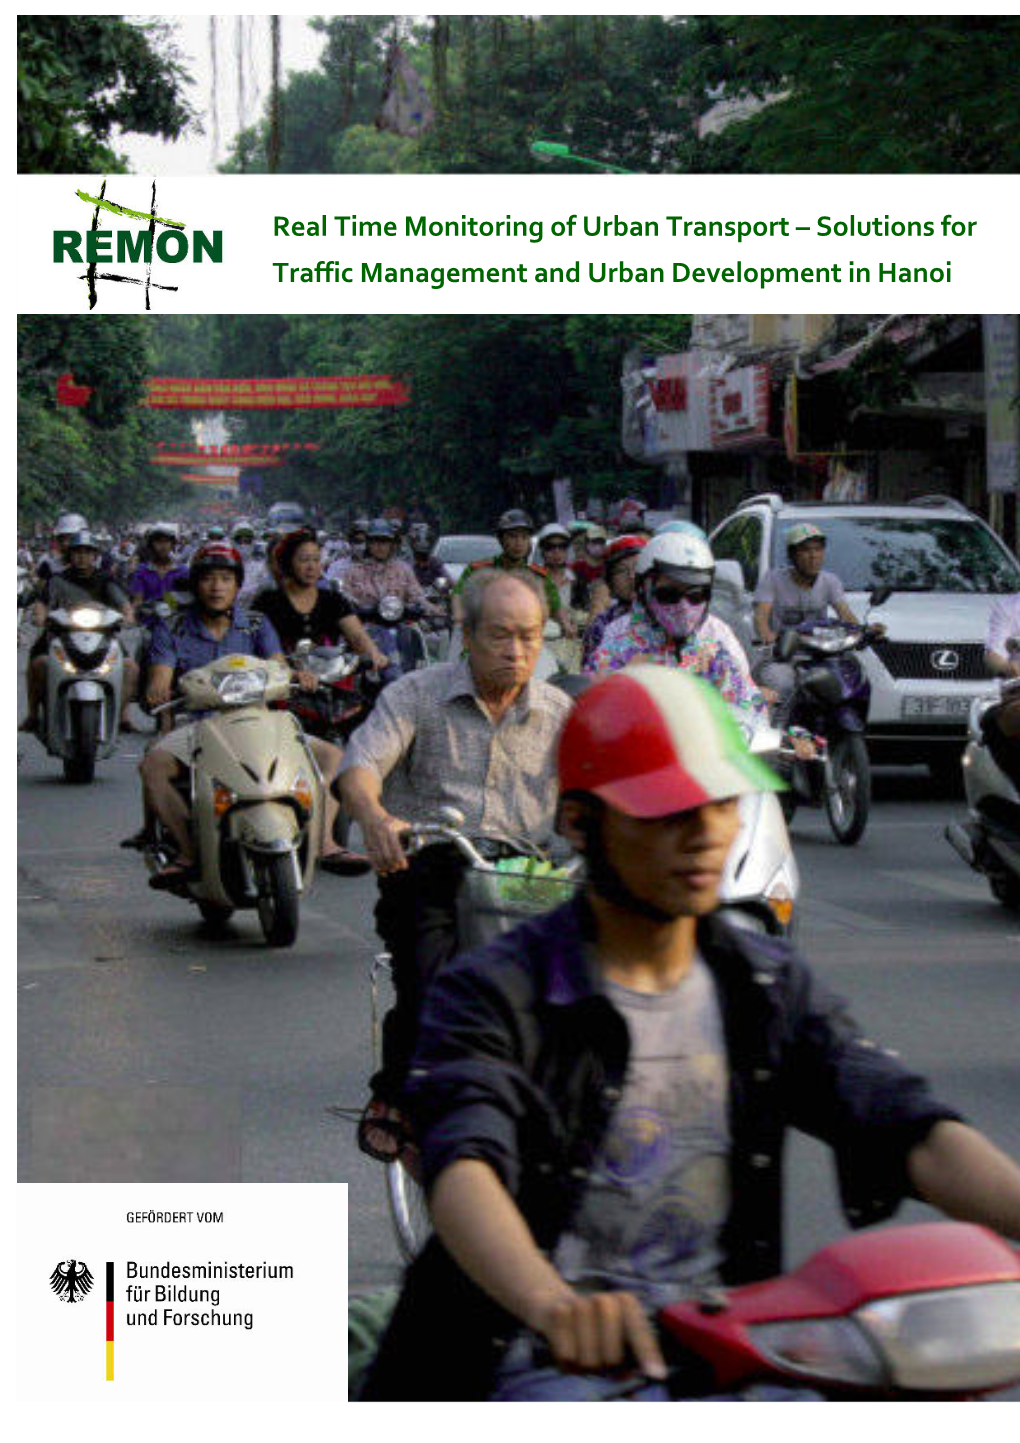 Real Time Monitoring of Urban Transport – Solutions for Traffic Management and Urban Development in Hanoi